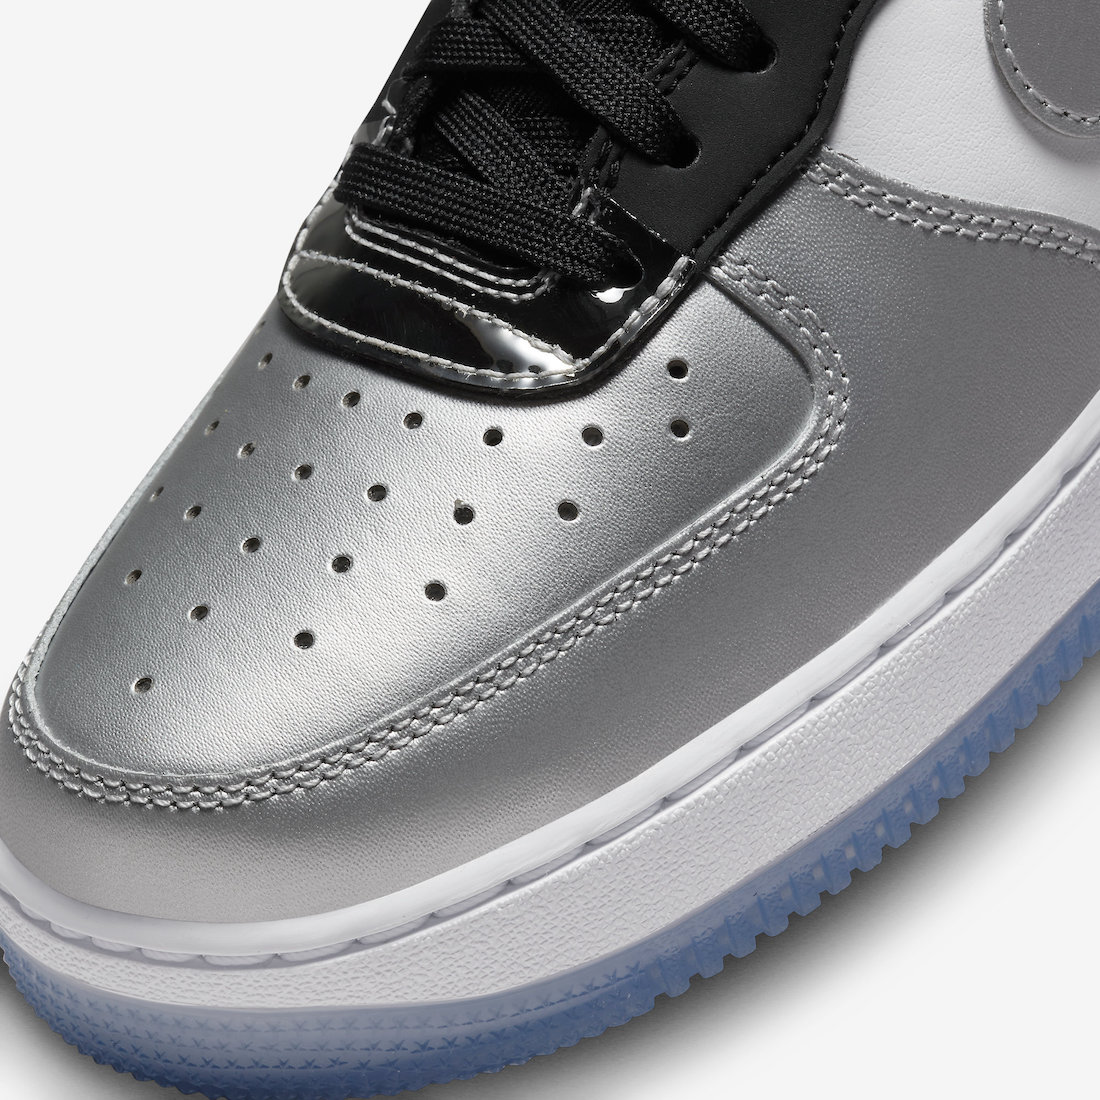 Nike Air Force 1 Low Chrome Metallic Silver Black DX6764-001 Release Date Price